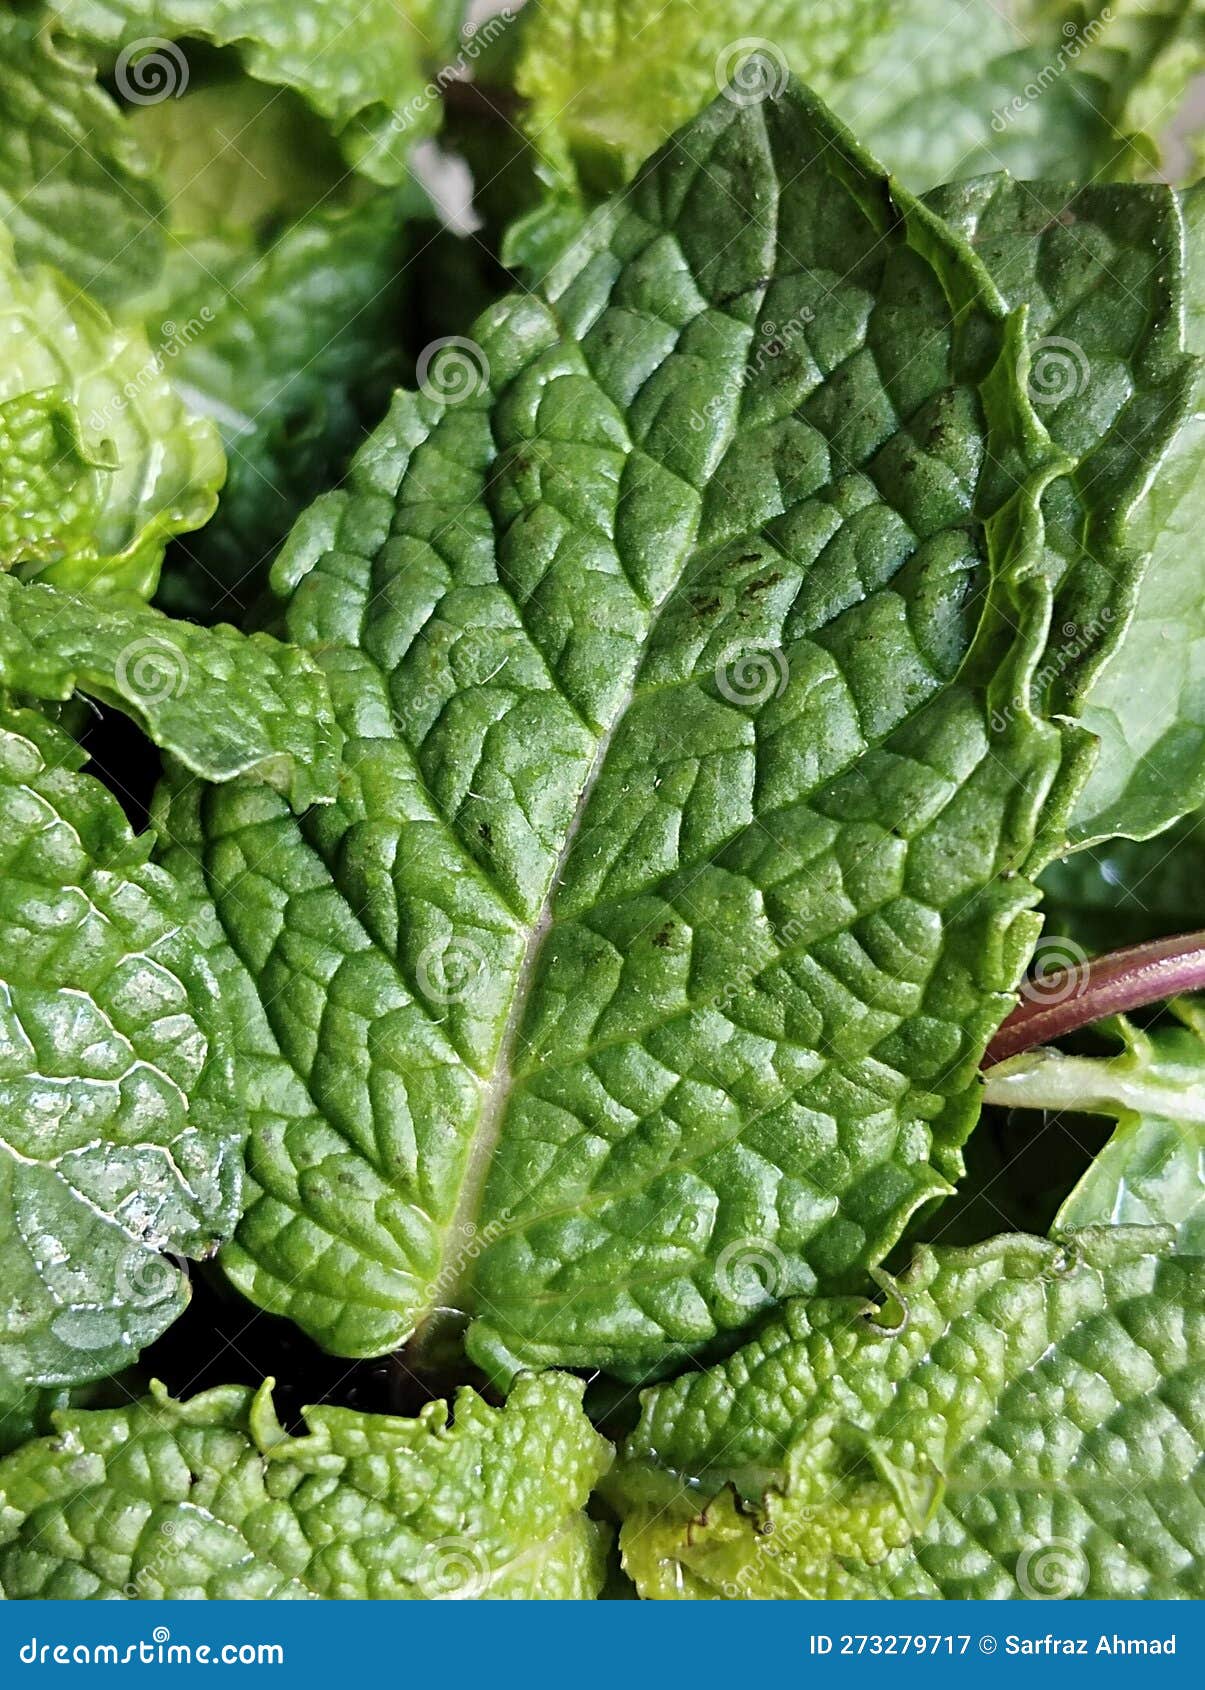 Texture of Mint Leaves stock image. Image of fuzzy, blunt - 273279717